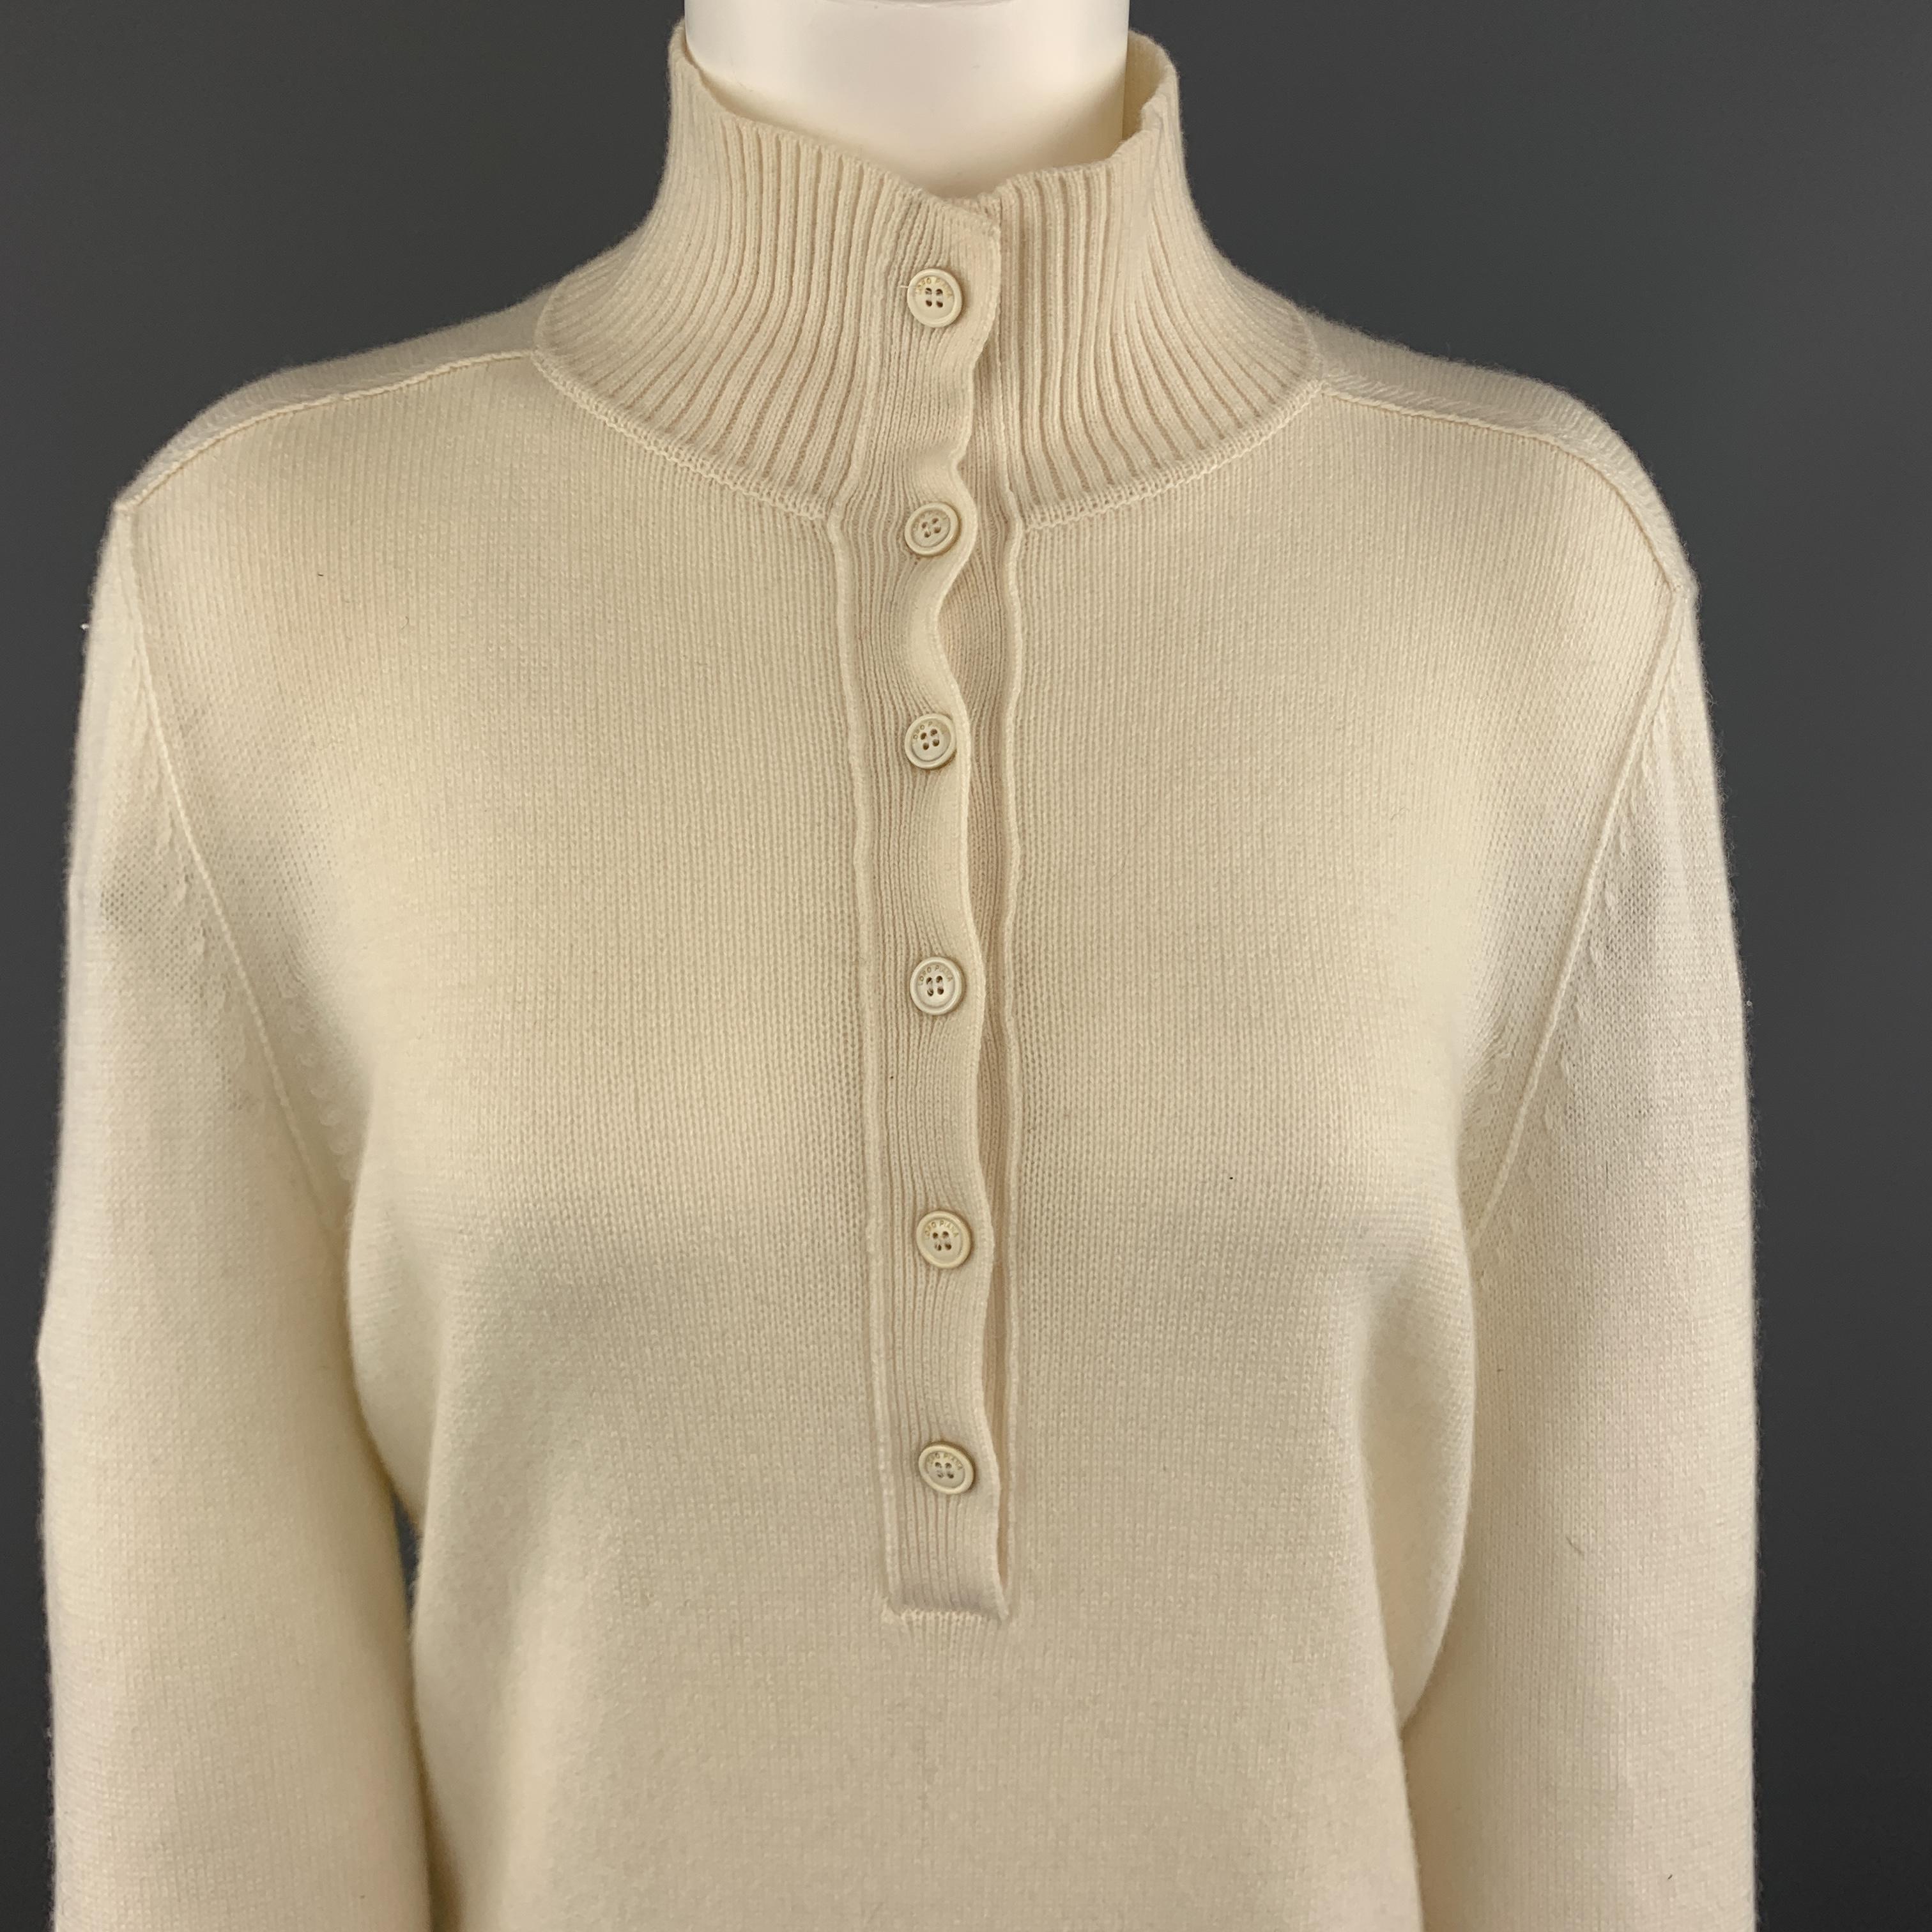 LORO PIANA pullover sweater comes in cream cashmere with a high mock neck, half button front, and ribbed details. Small hole in front. As-is. With Tags. Made in Italy.

Good Pre-Owned Condition.
Marked: IT 46

Measurements:

Shoulder: 16 in.
Bust: